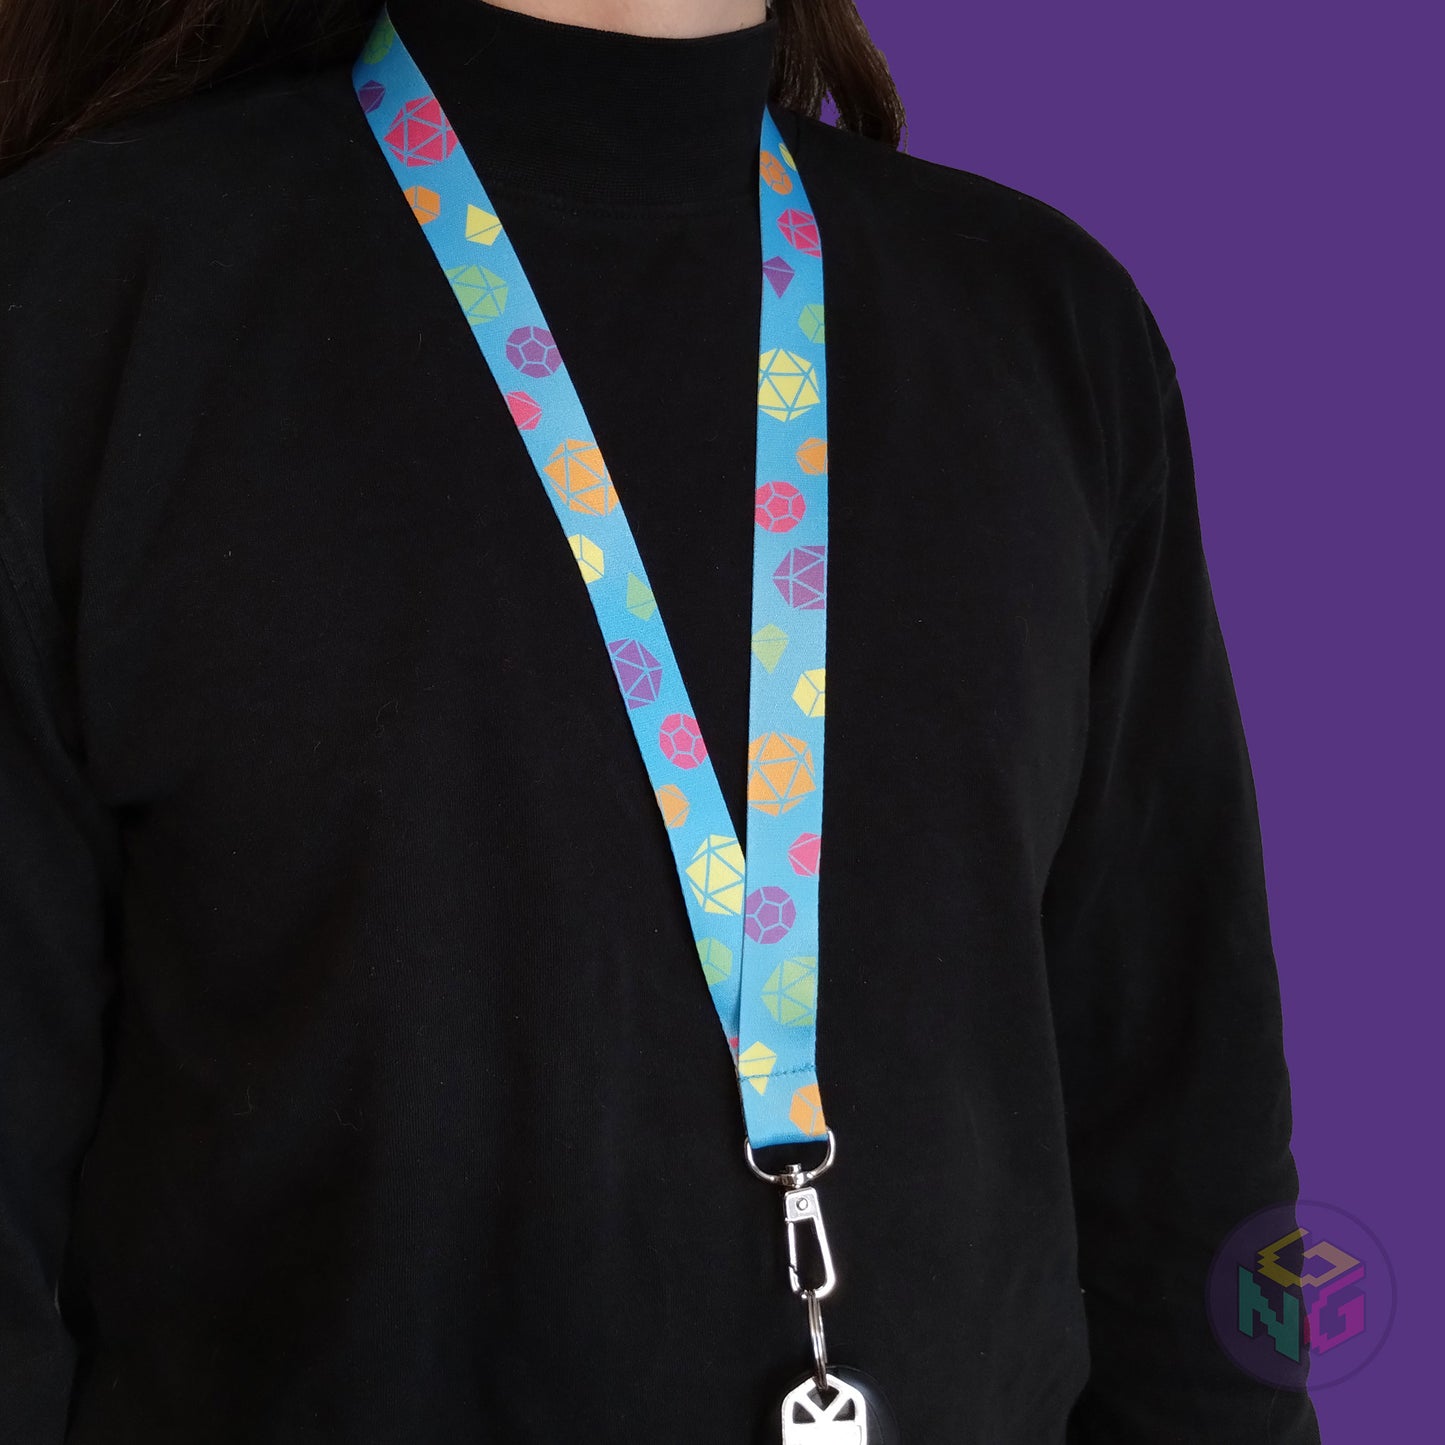 blue rainbow pride lanyard being worn by a flat chested person wearing a black turtleneck. The end of the lanyard falls between their sternum and bellybutton and has a key fob clipped to the end